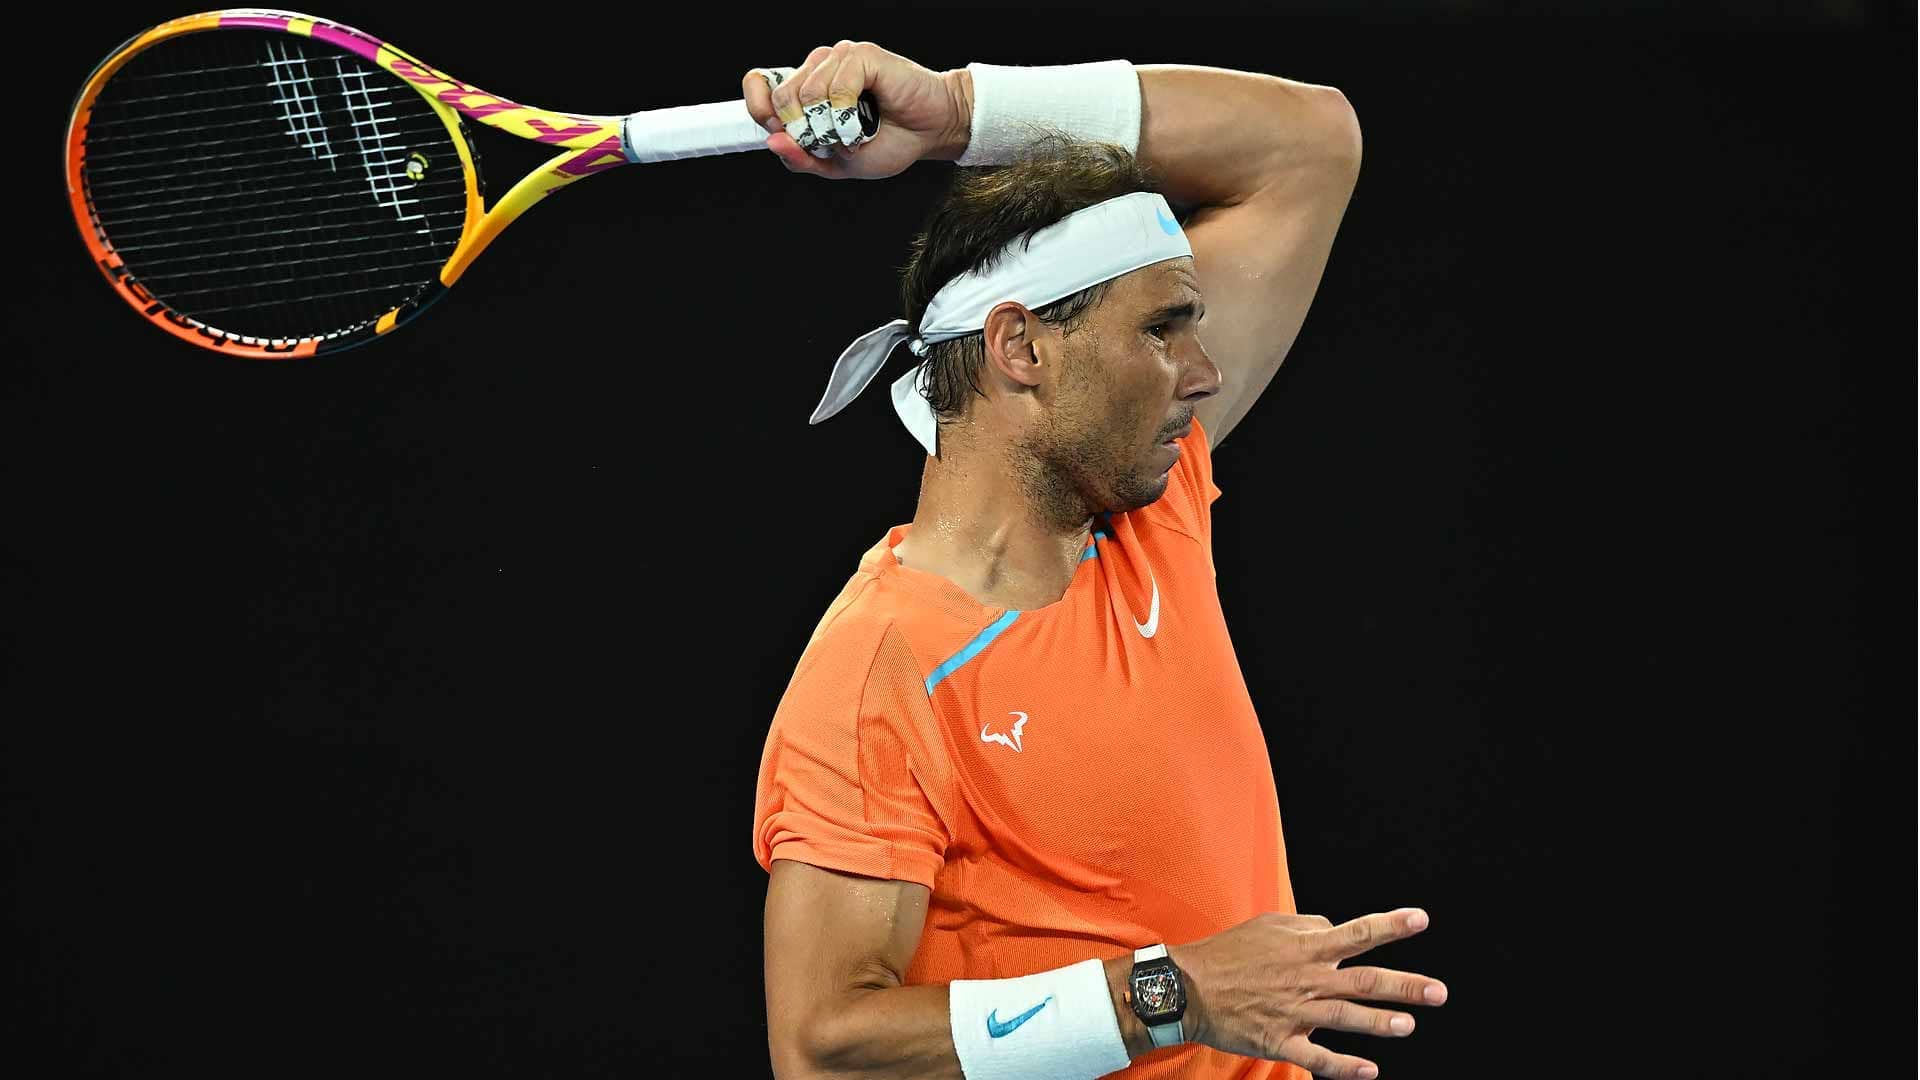 Rafael Nadal loses his second-round match at the Australian Open on Wednesday against Mackenzie McDonald.